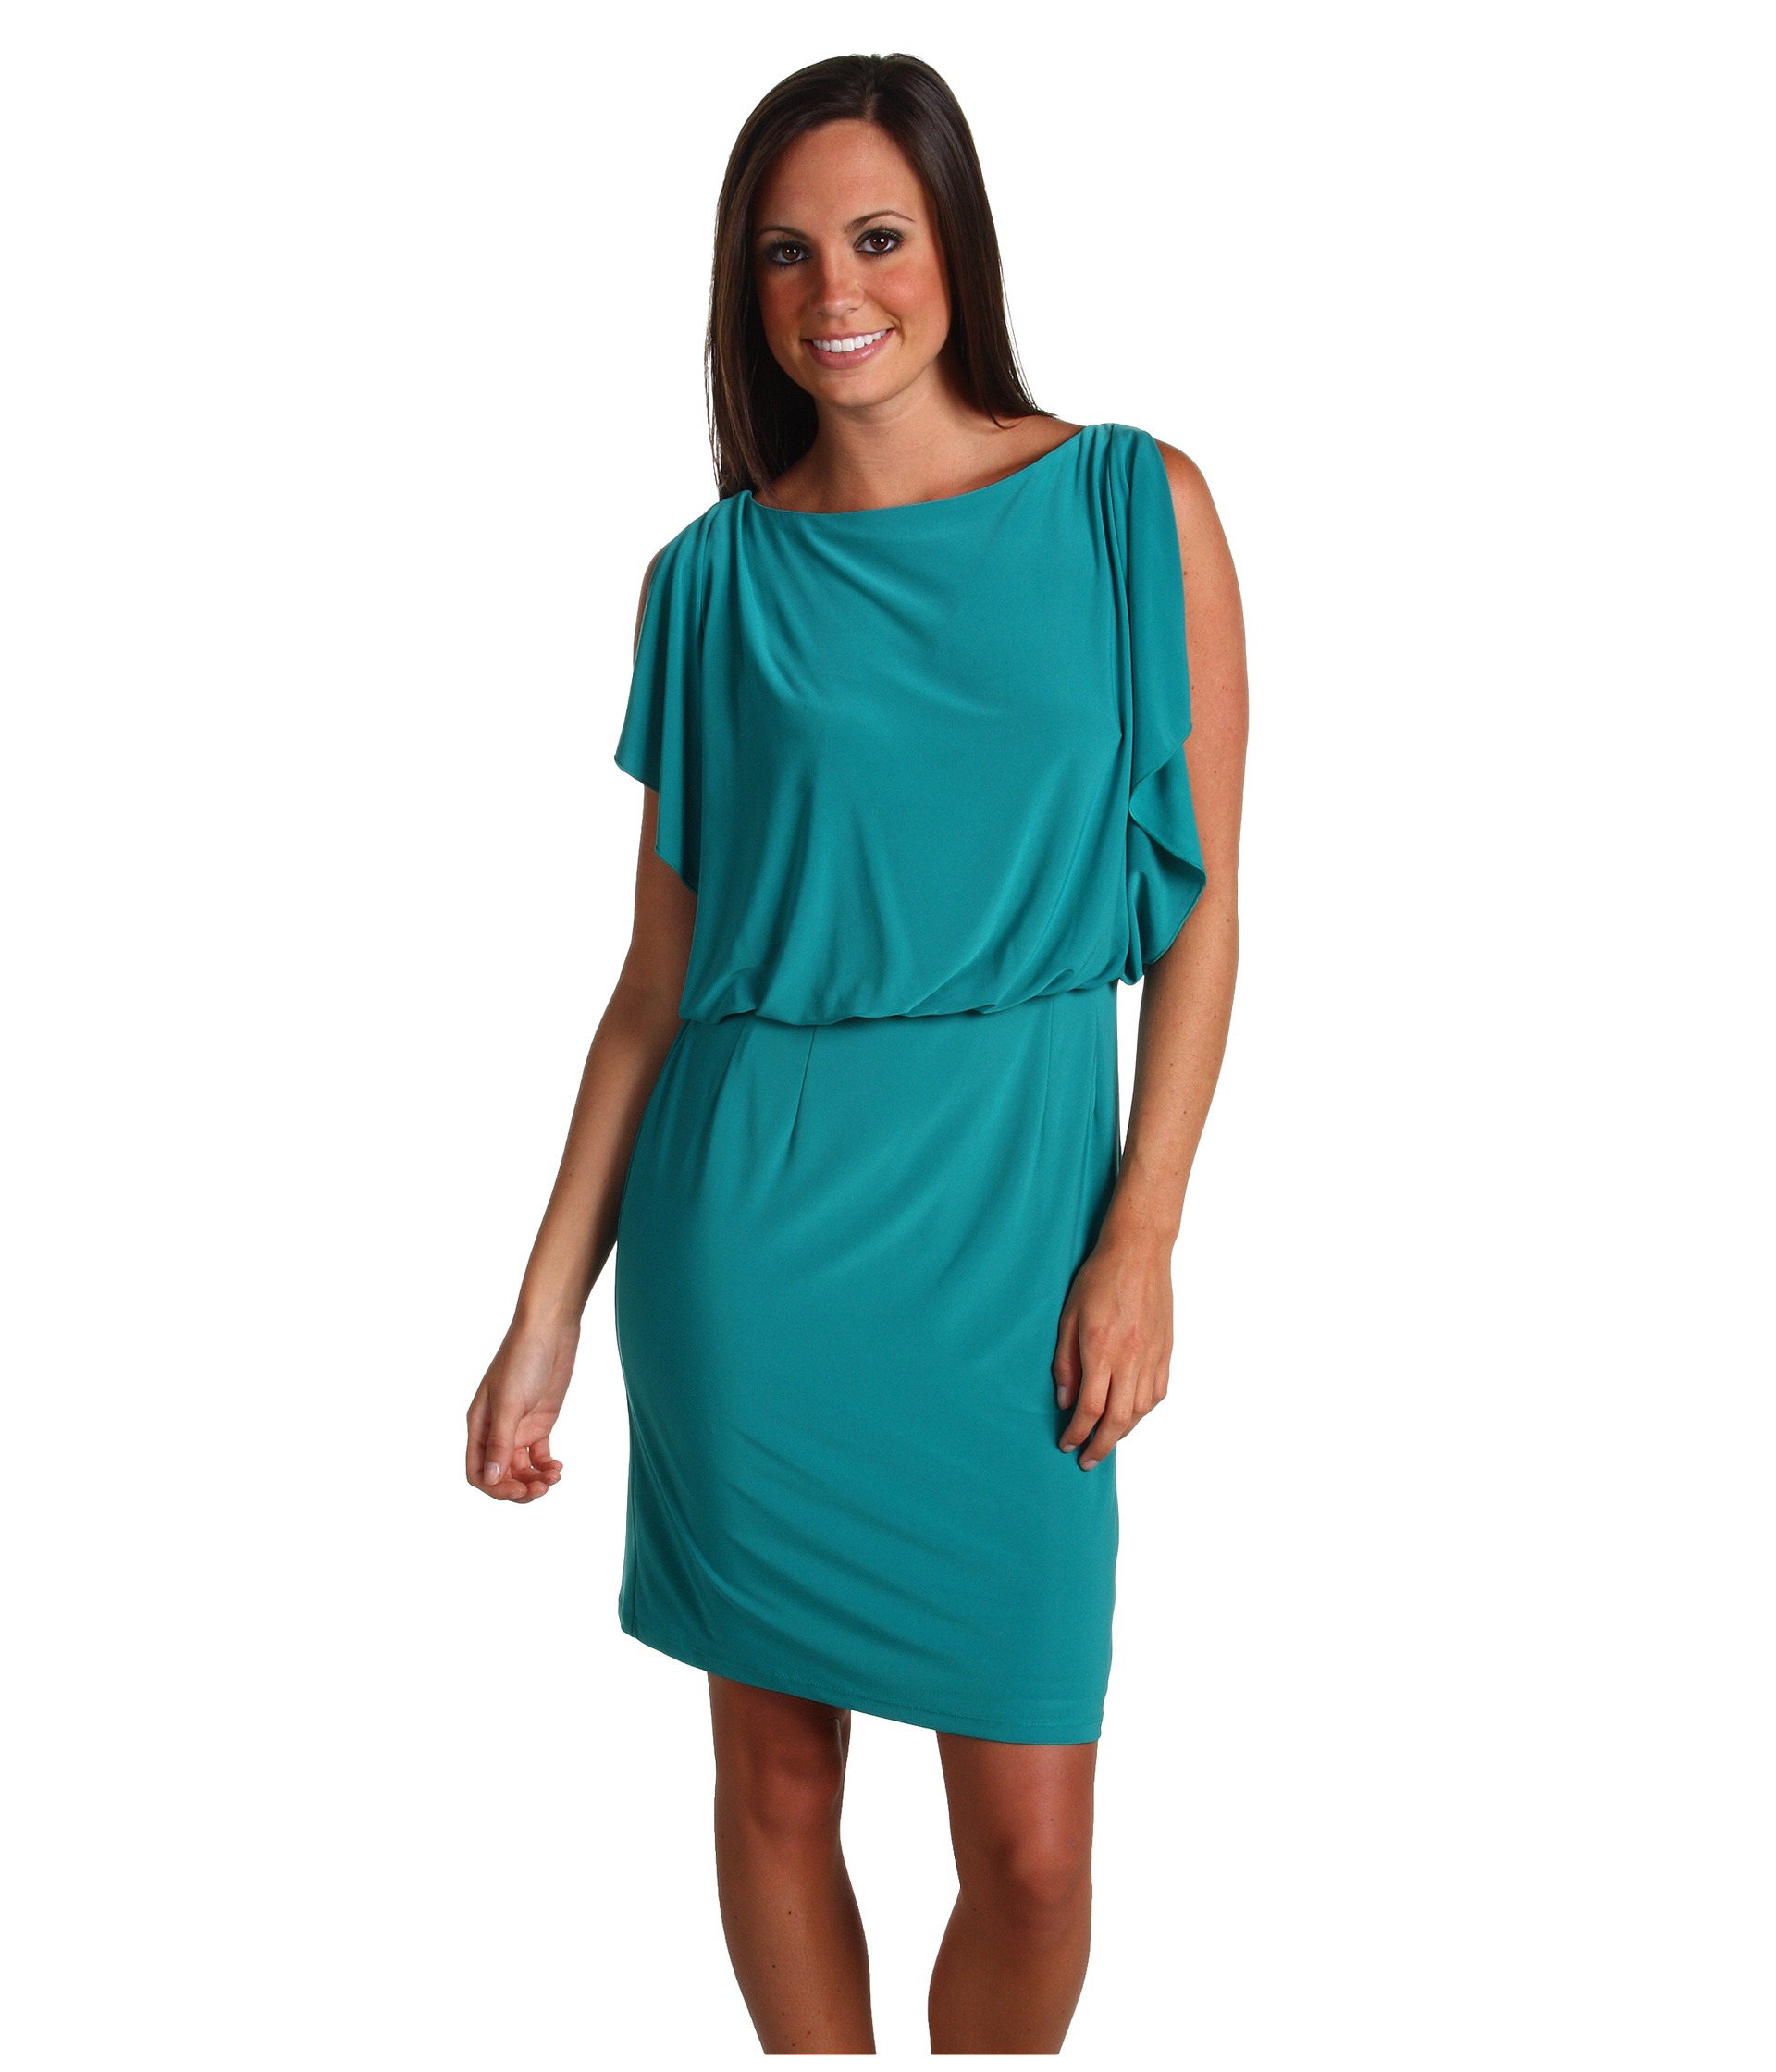 Jessica Simpson Variegated Cowl Sweater Dress $41.99 (  MSRP $ 